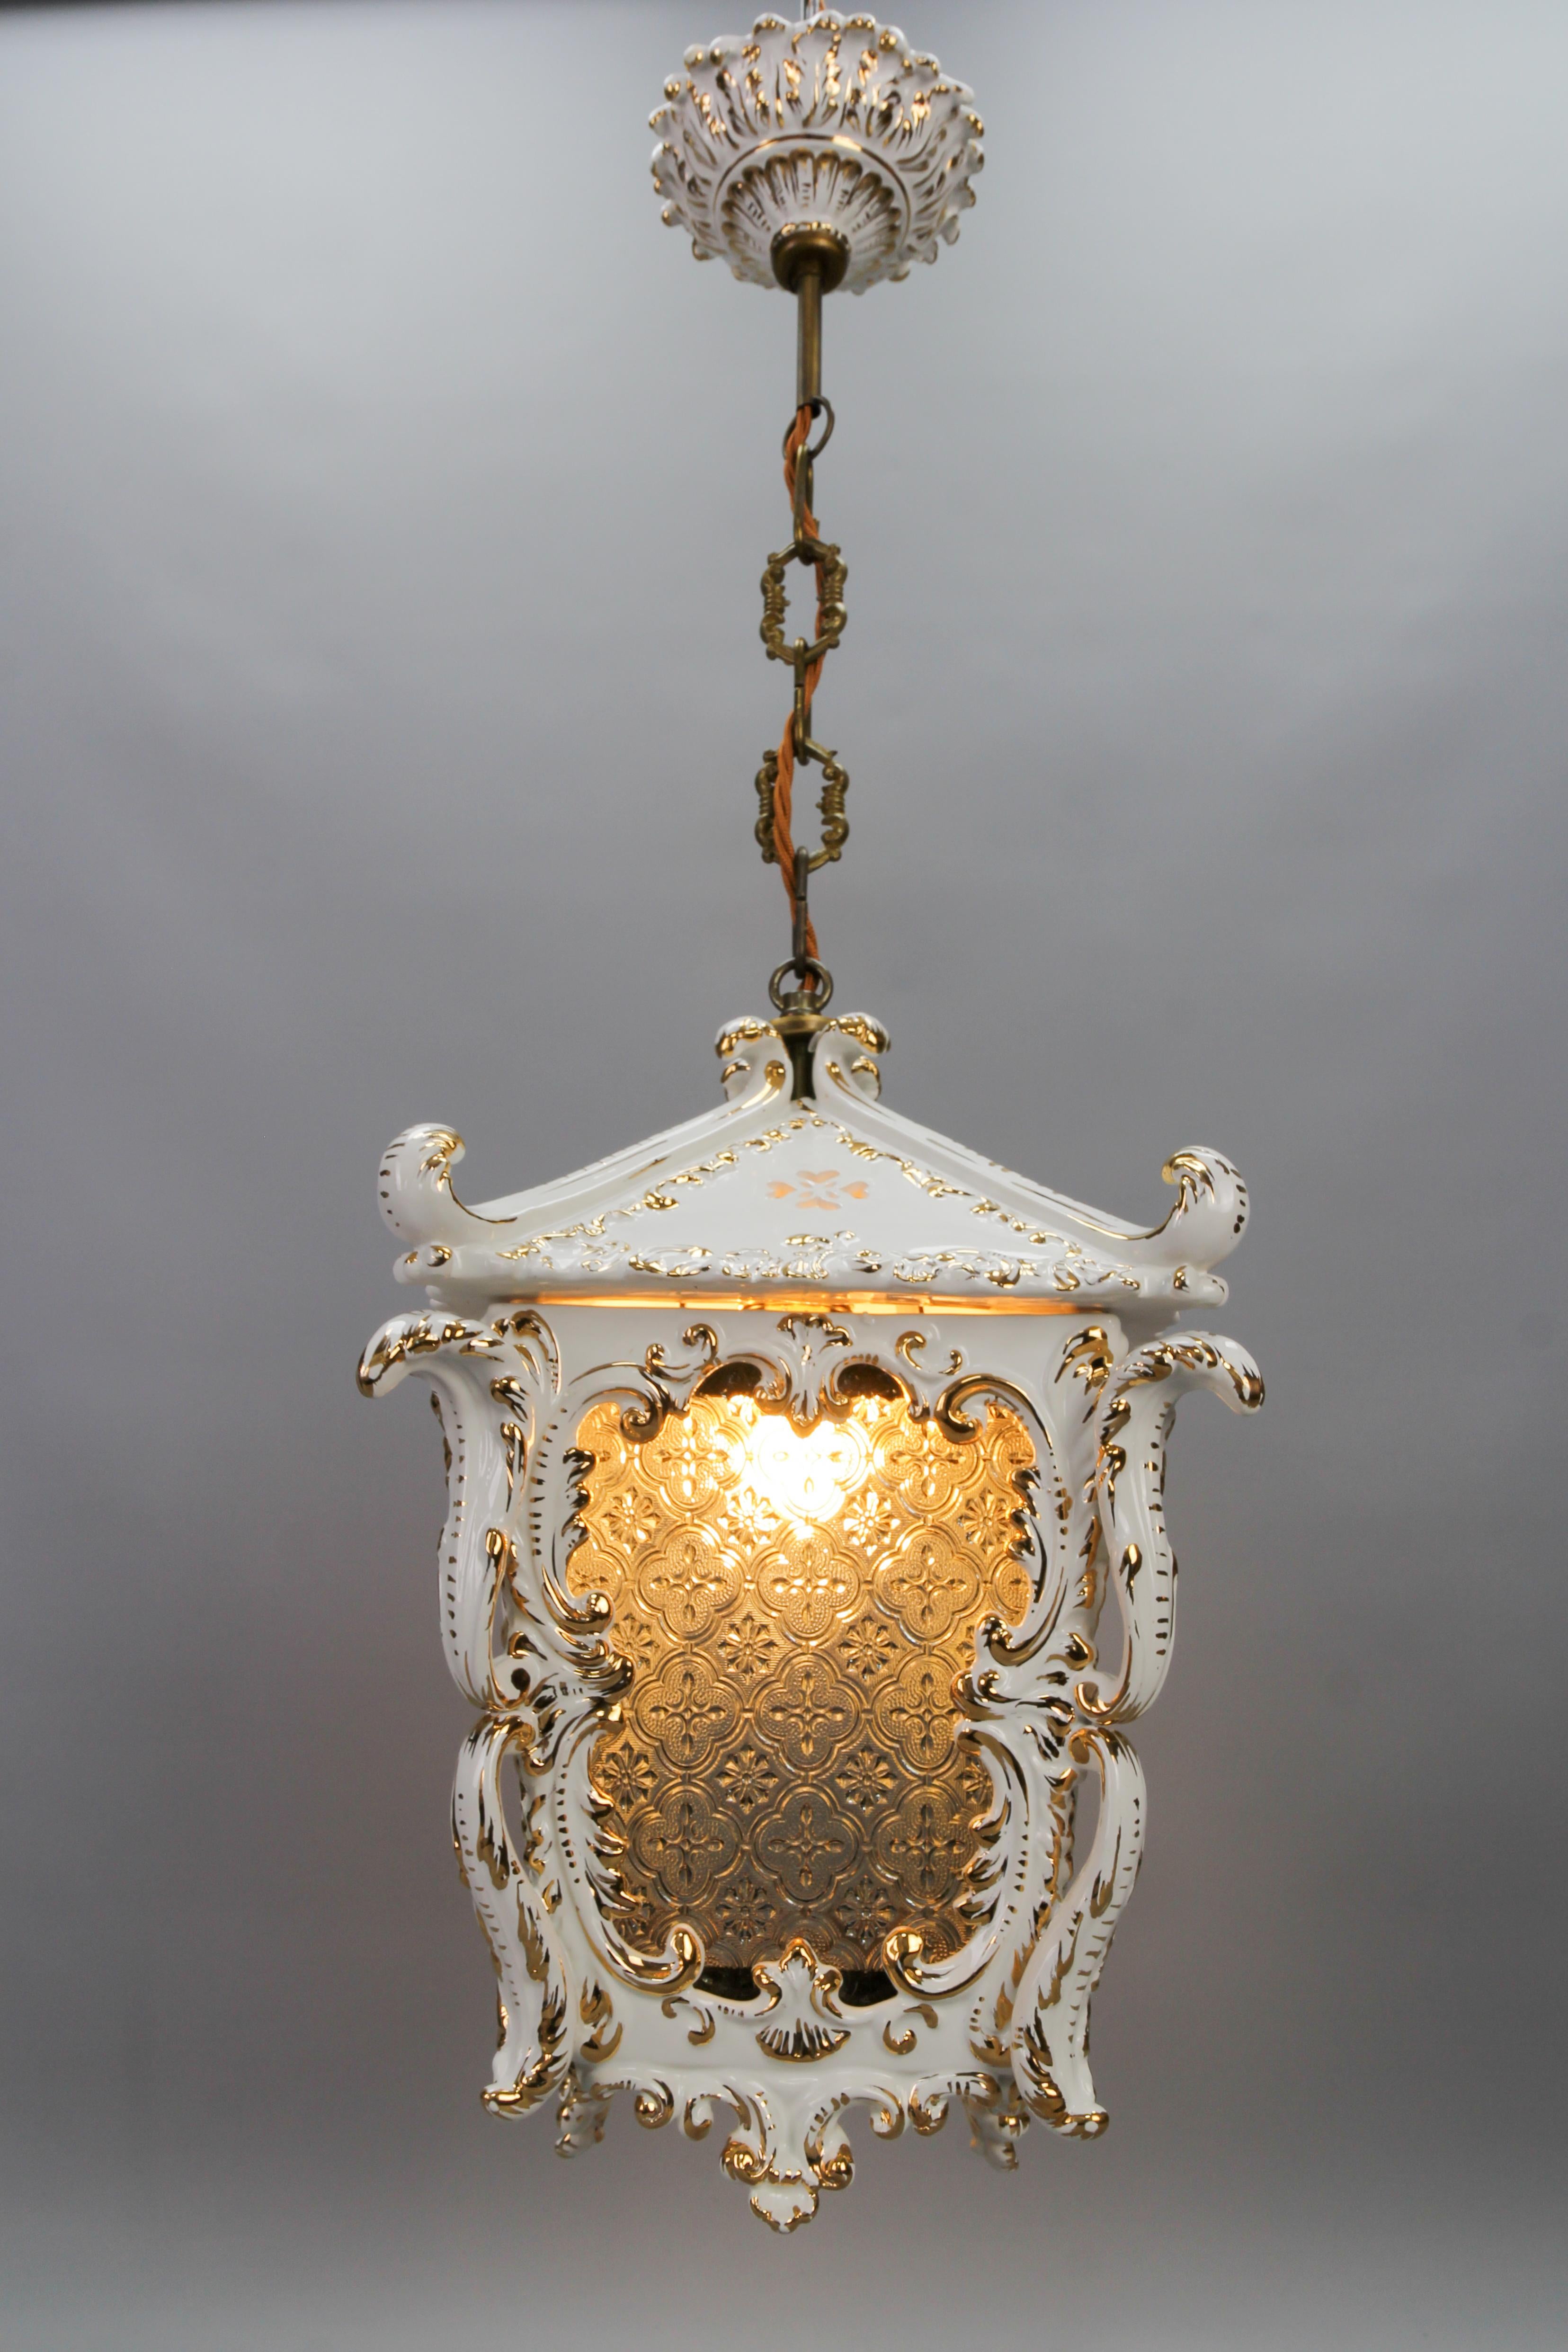 Vintage French Rococo Style White Ceramic and Glass Hanging Lantern, 1970s For Sale 1